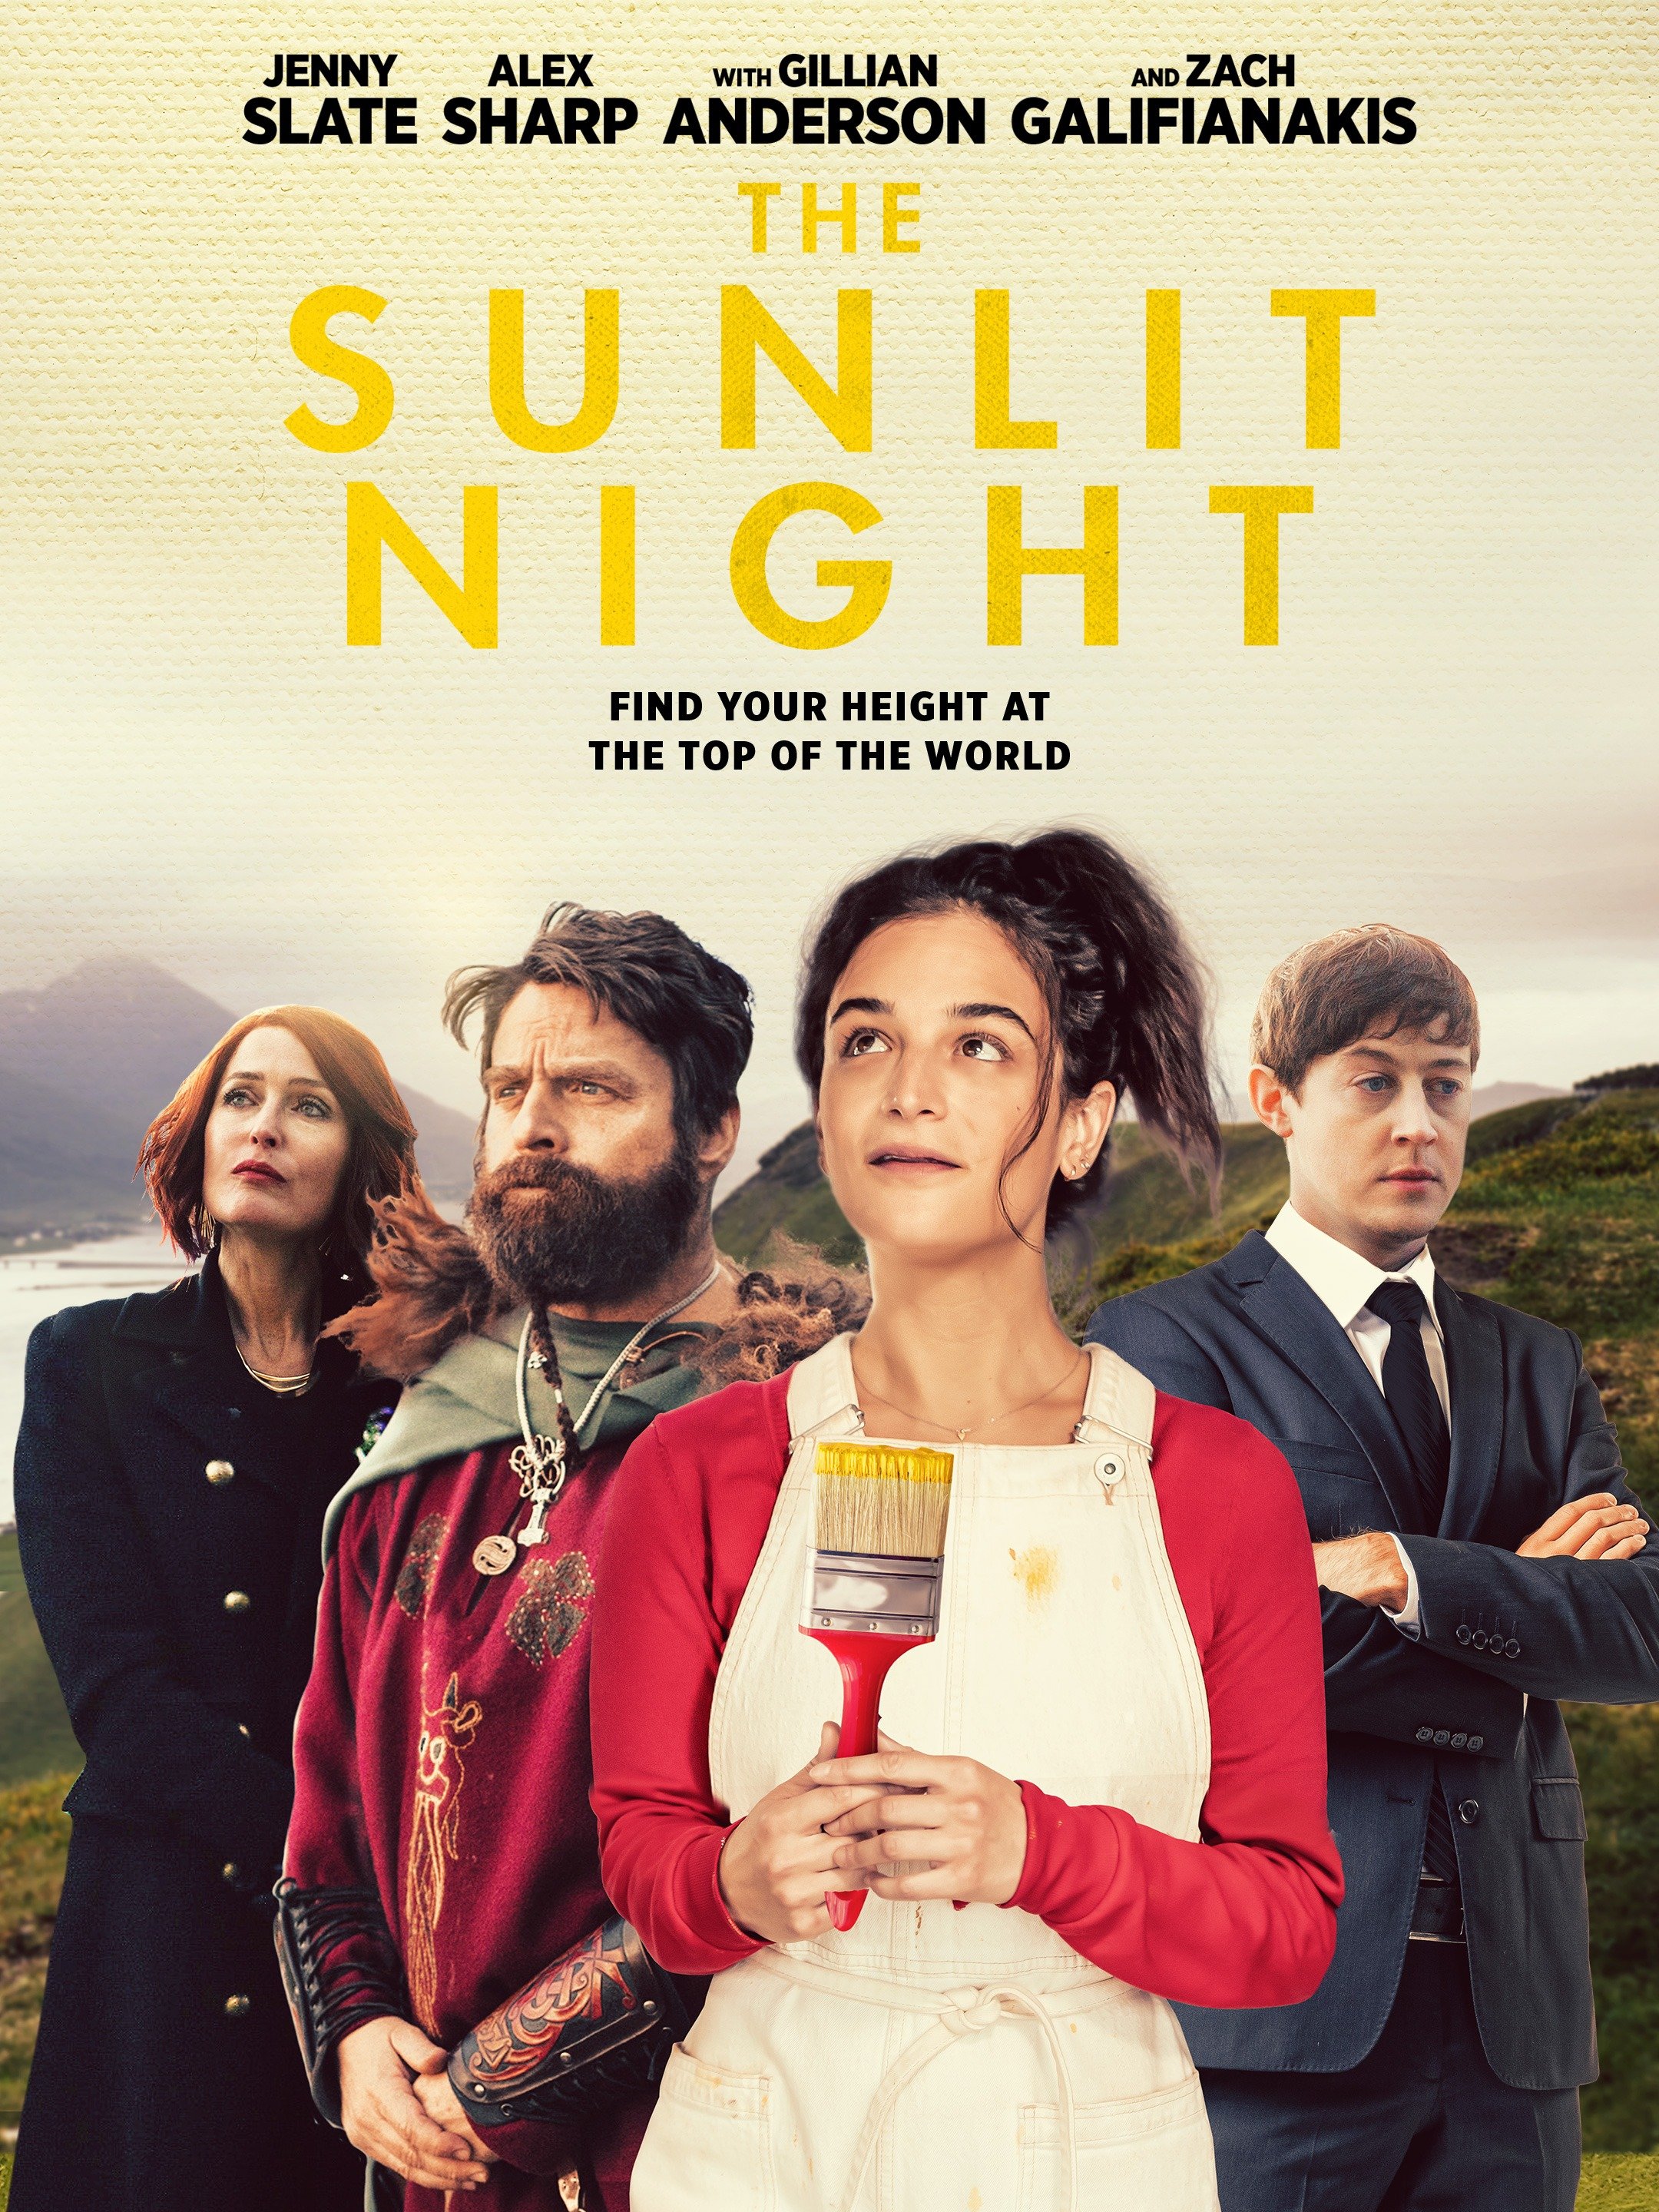 The Sunlit Night Trailer 1 Trailers And Videos Rotten Tomatoes 